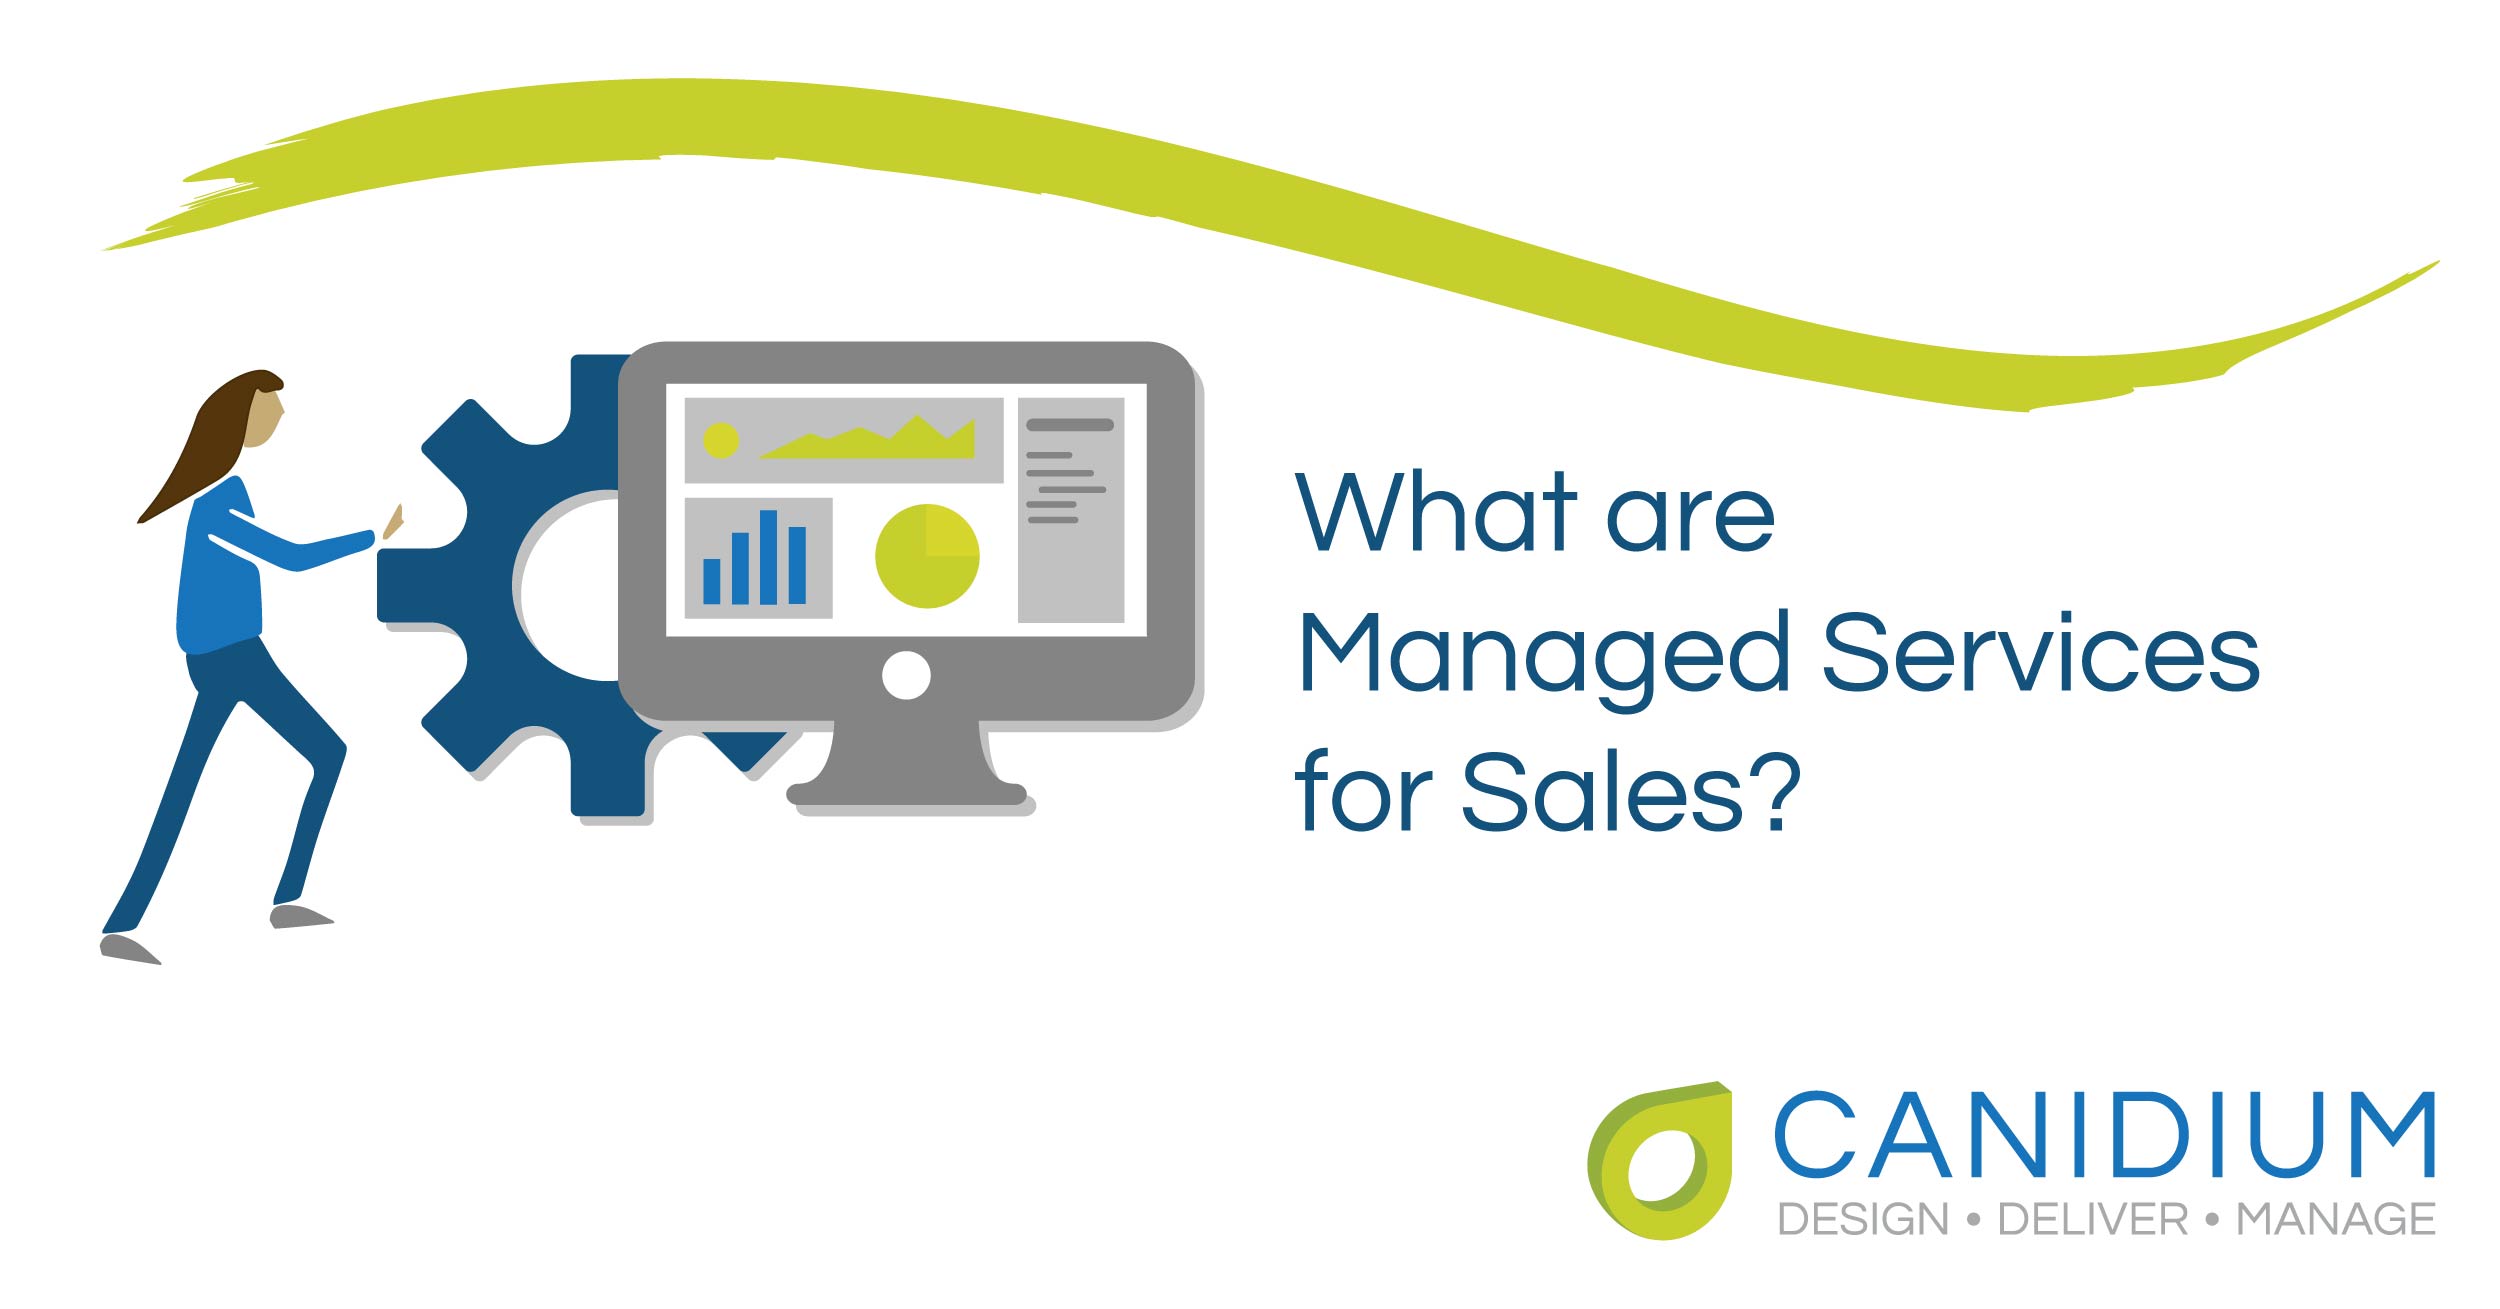 What are Managed Services for Sales?